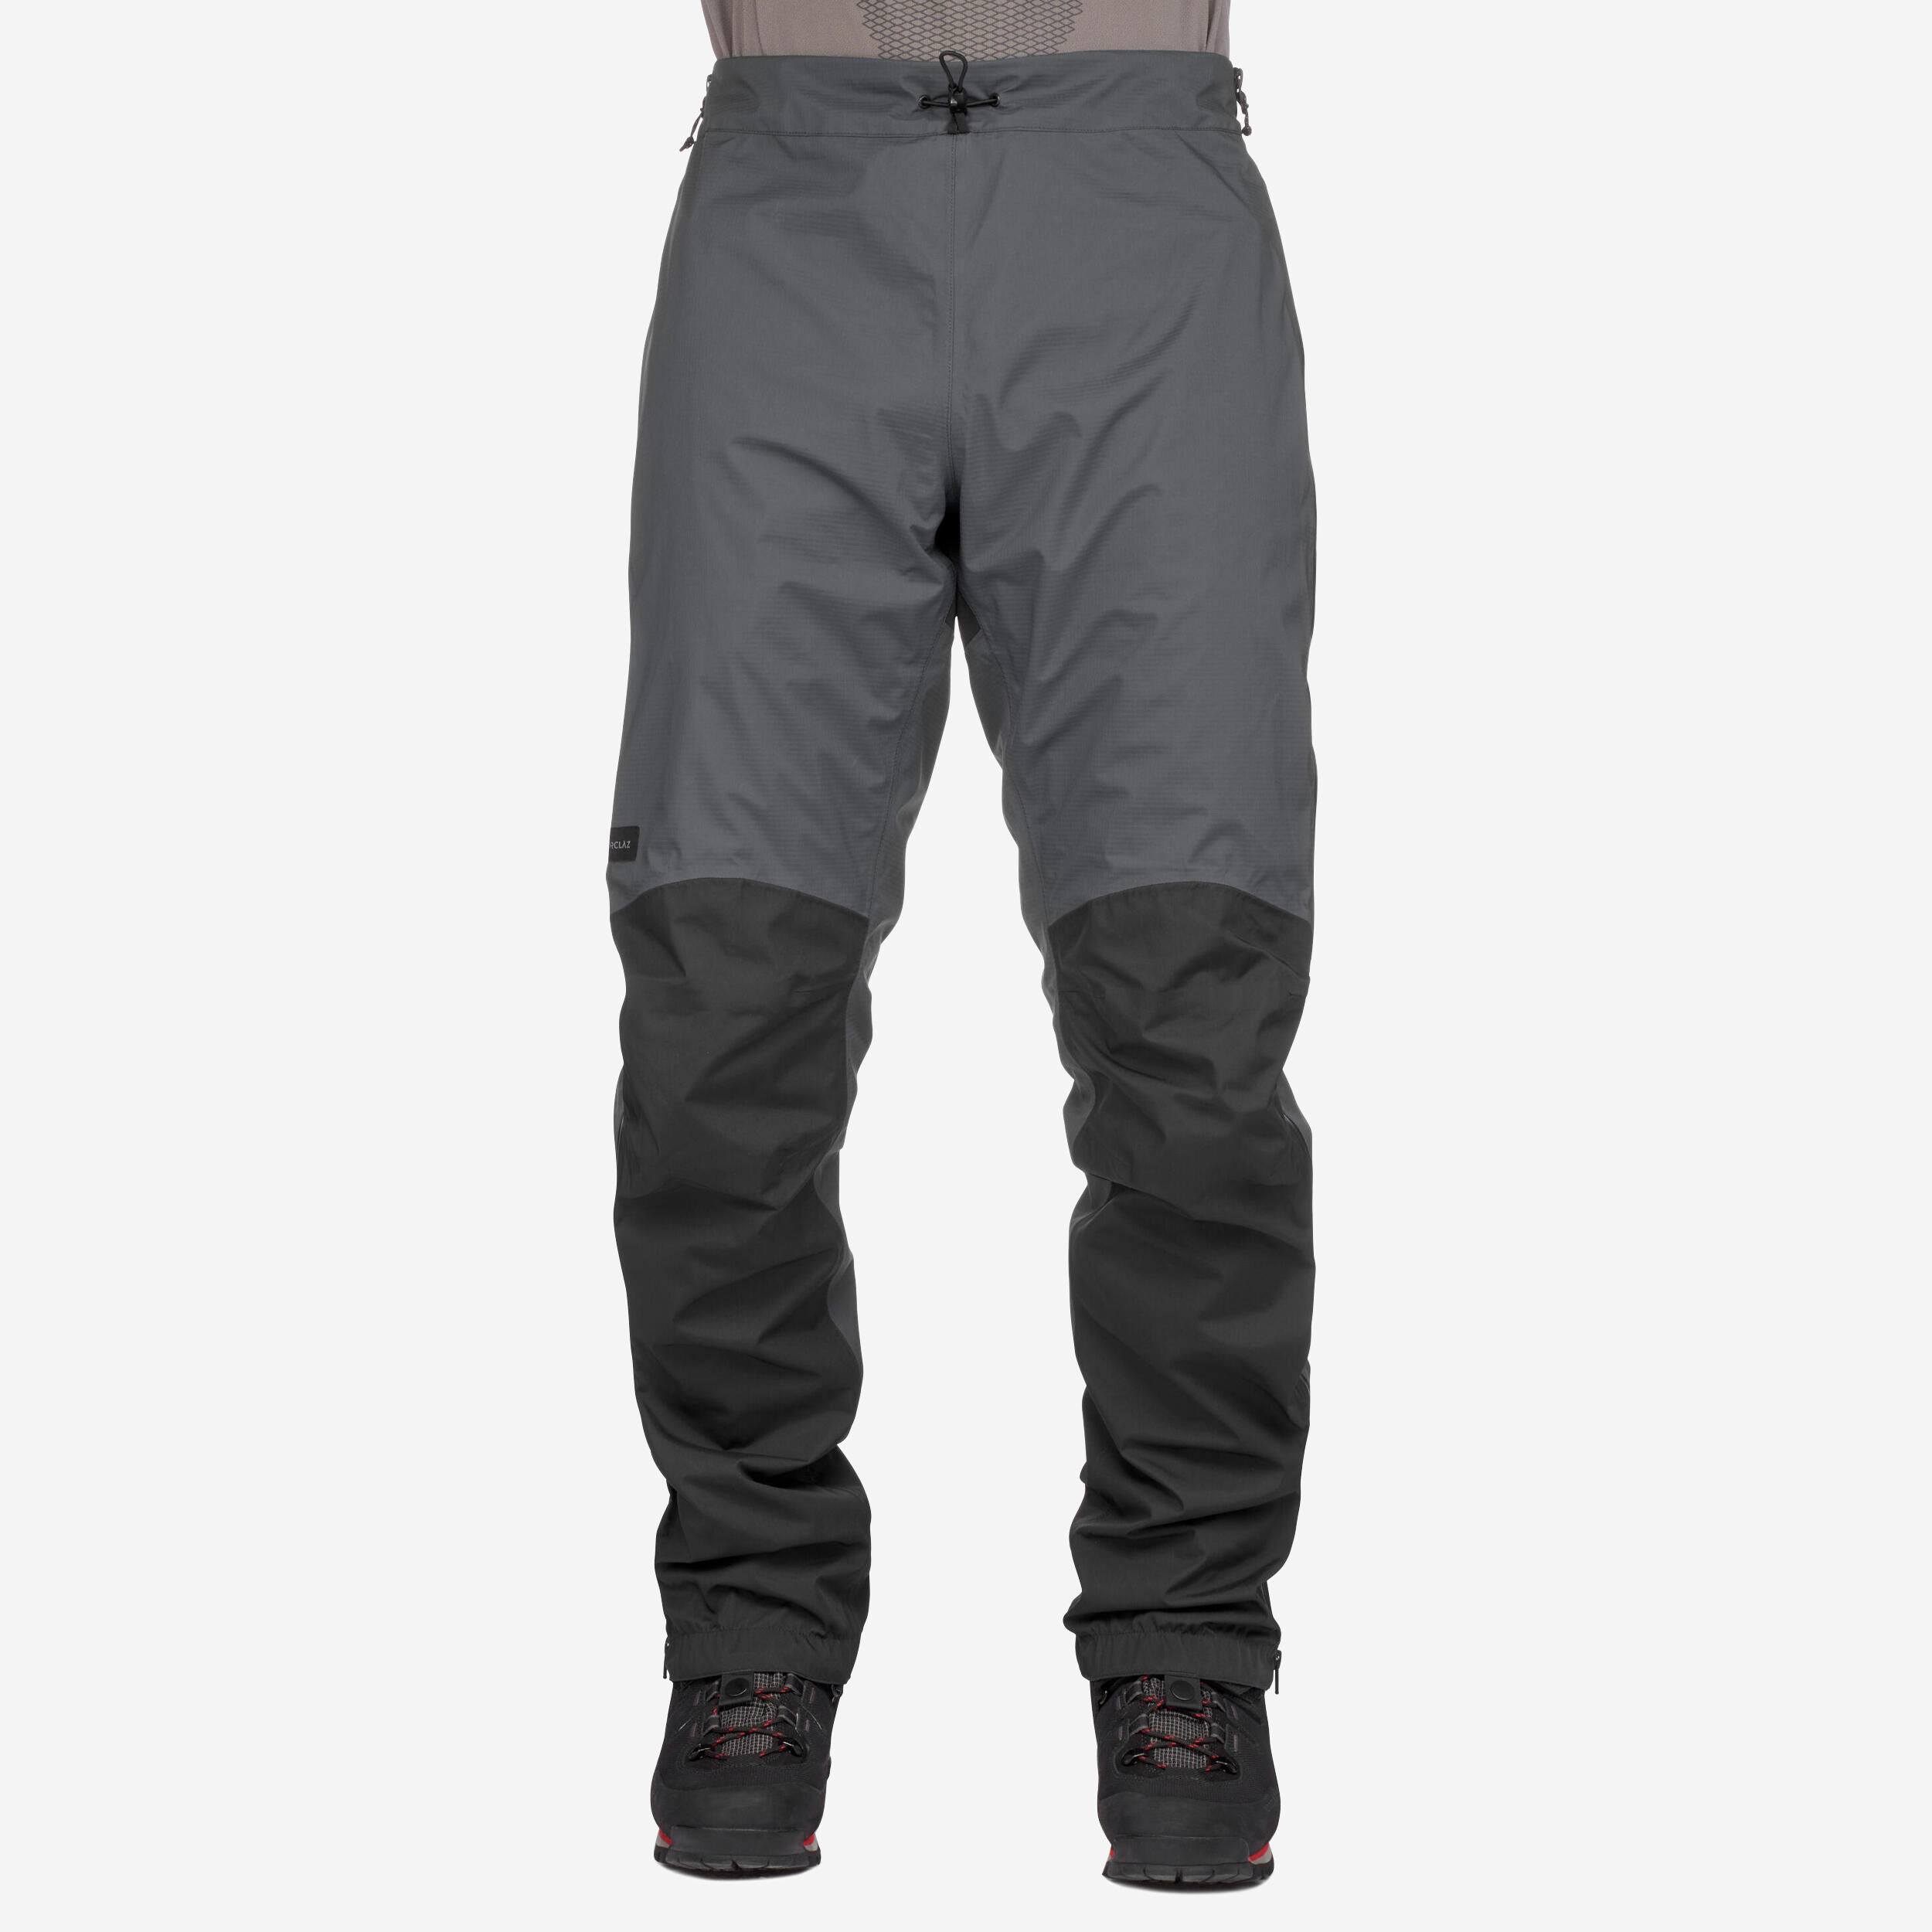 FORCLAZ Men's Waterproof over trousers - 20,000 mm - Taped seams - MT500 